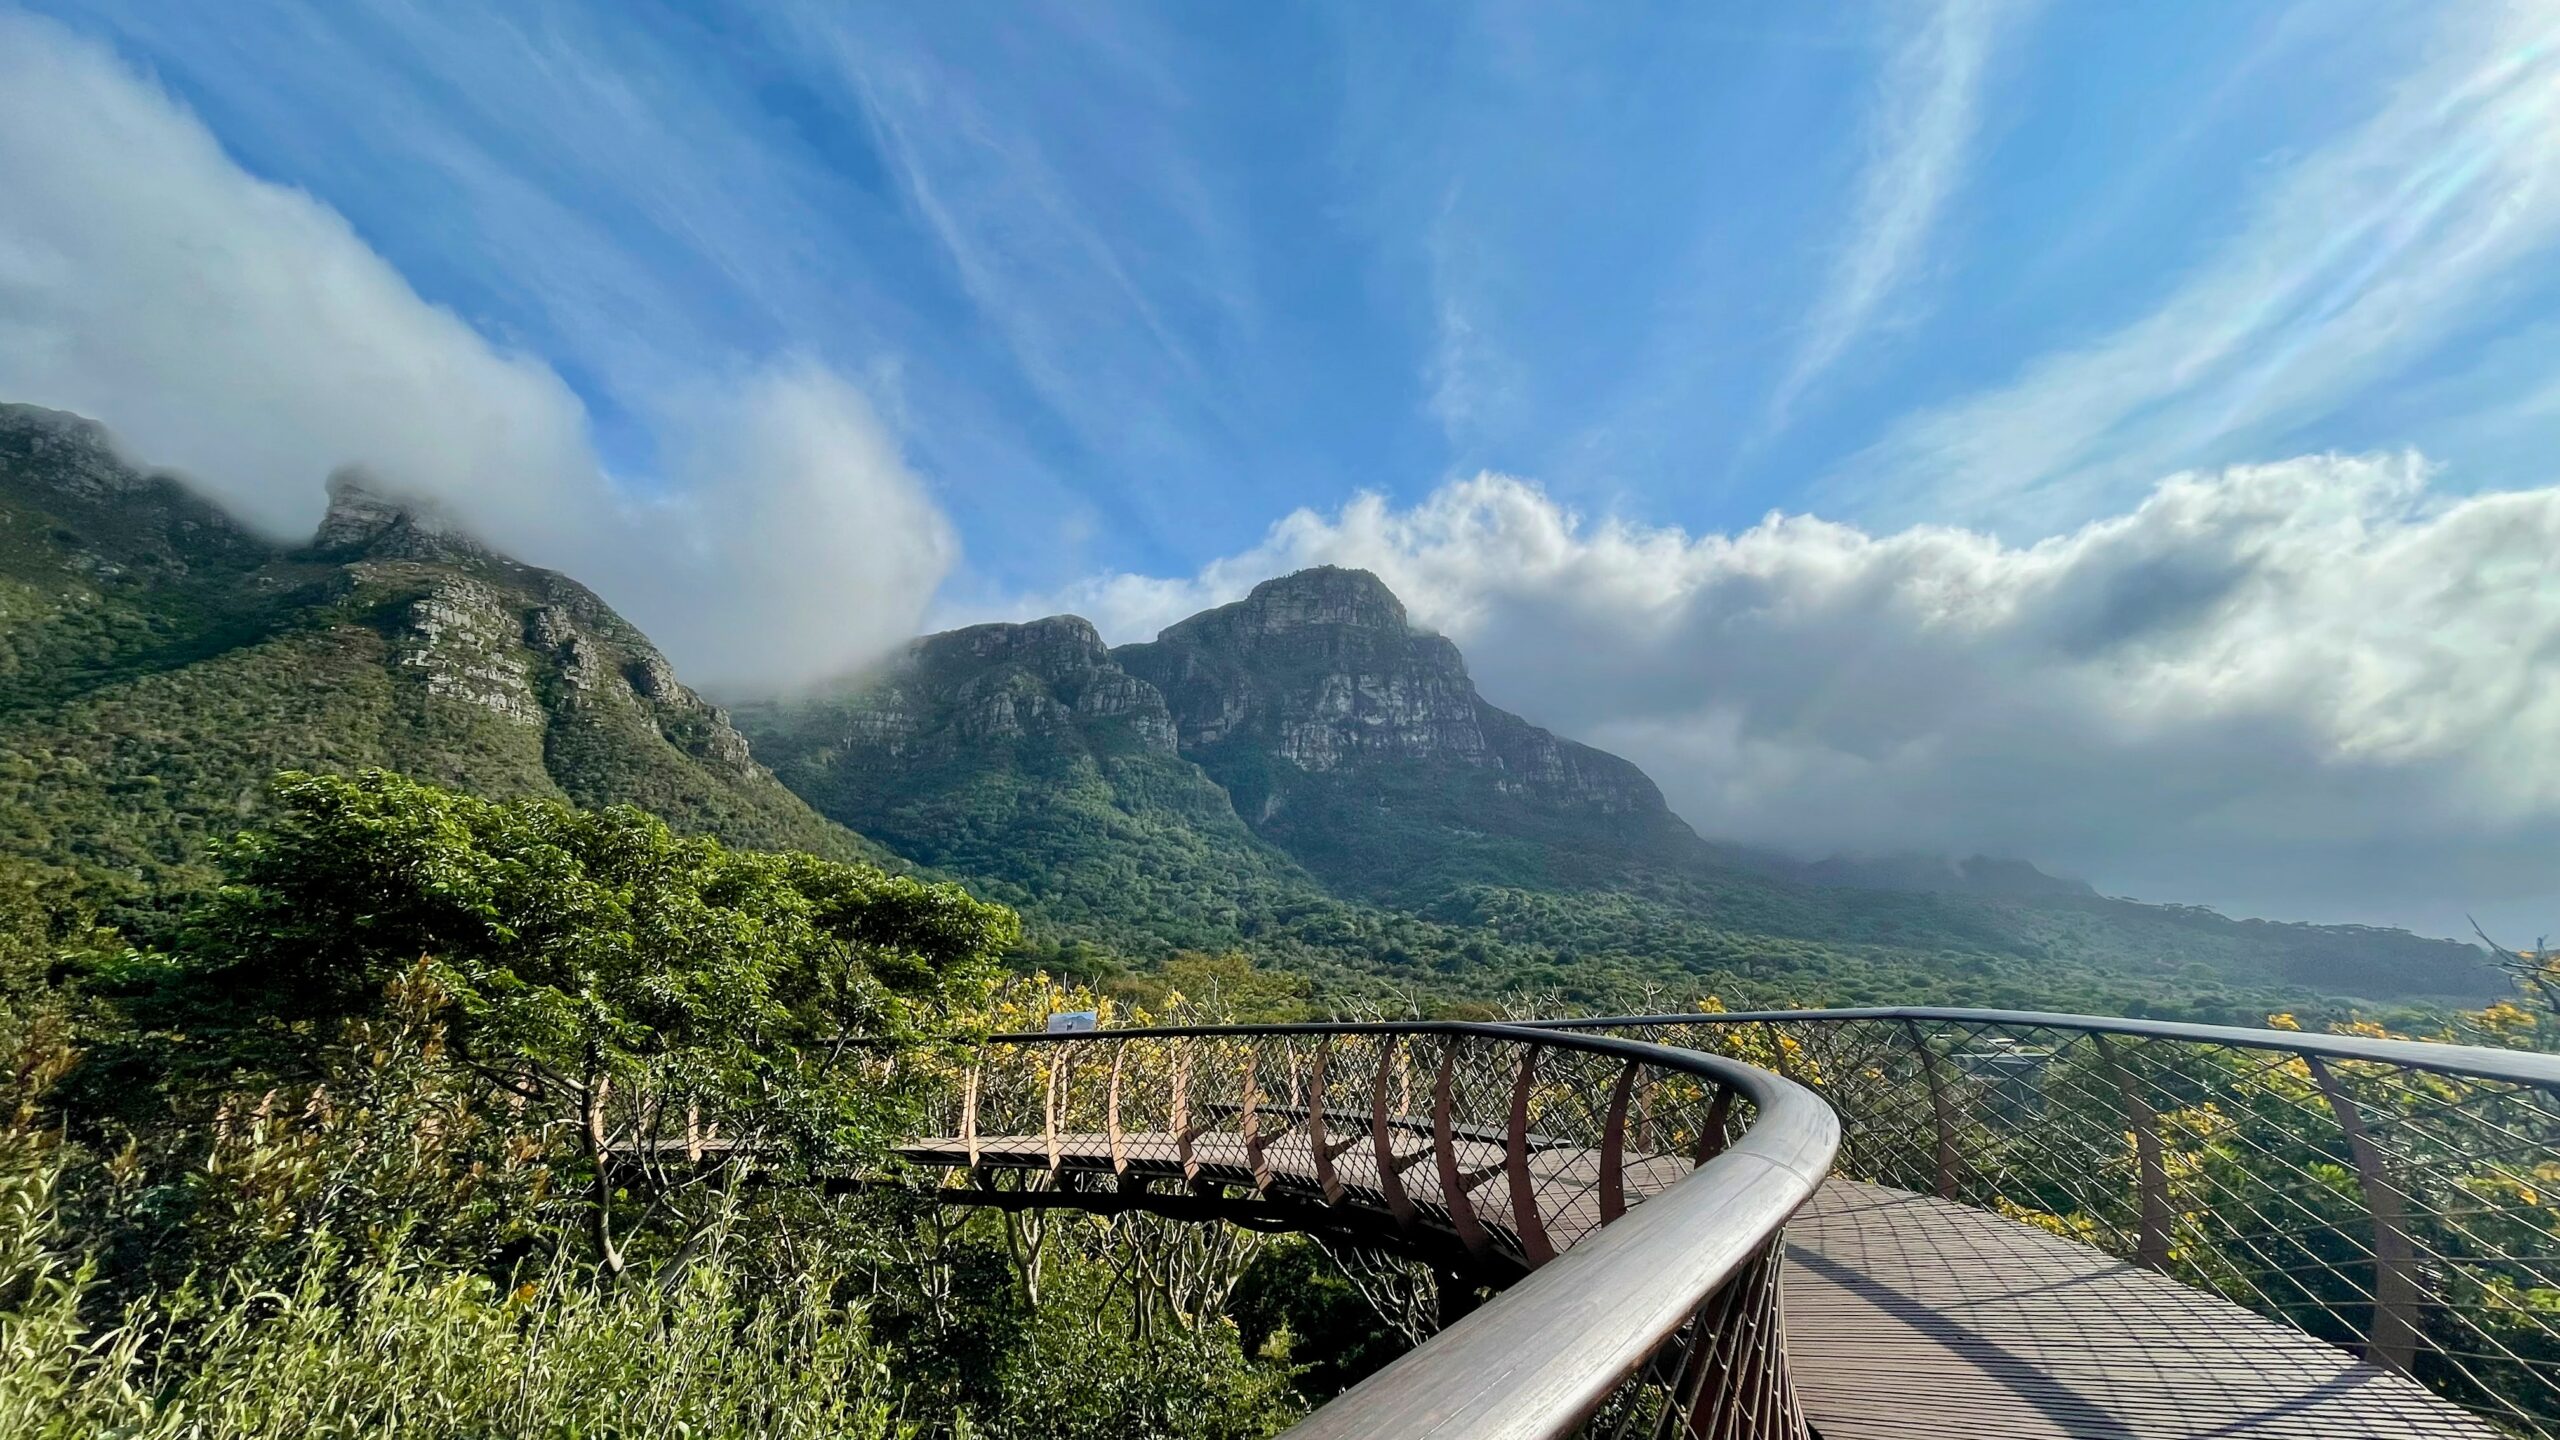 The picturesque Boomslang Tree Canopy Walkway